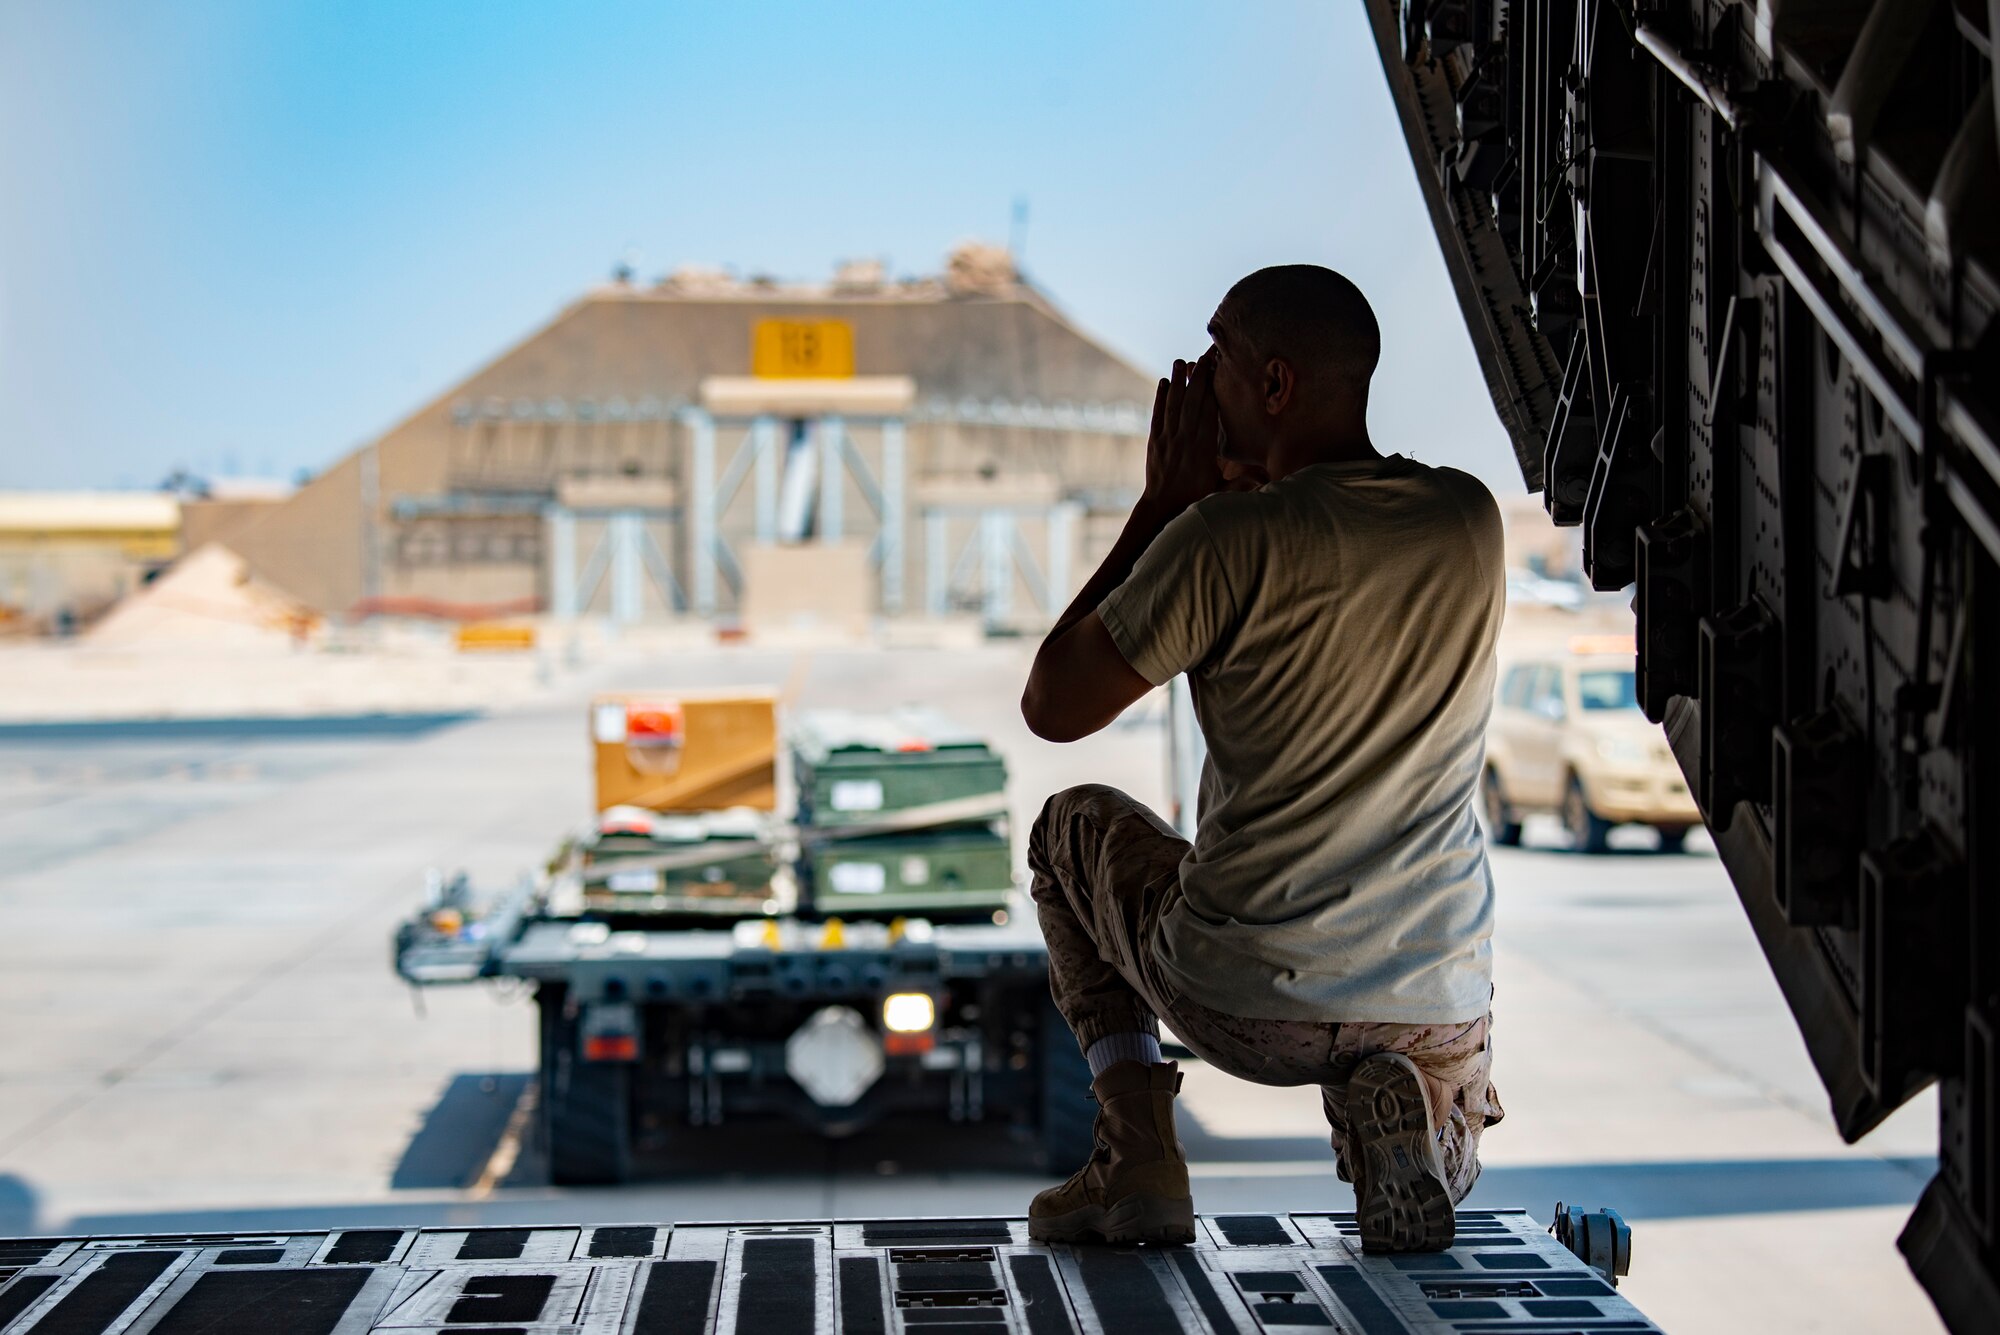 A Kuwait Air Force member directs a K-loader to a Kuwait Air Force C-17 Globemaster III at Ali Al Salem Air Base, Kuwait, July 26, 2021. One of the priorities of the 386th Air Expeditionary Wing is to foster enduring partnerships. These partnerships are built on mutual respect and critical to current and future missions. (U.S. Air Force Senior Airman Helena Owens)